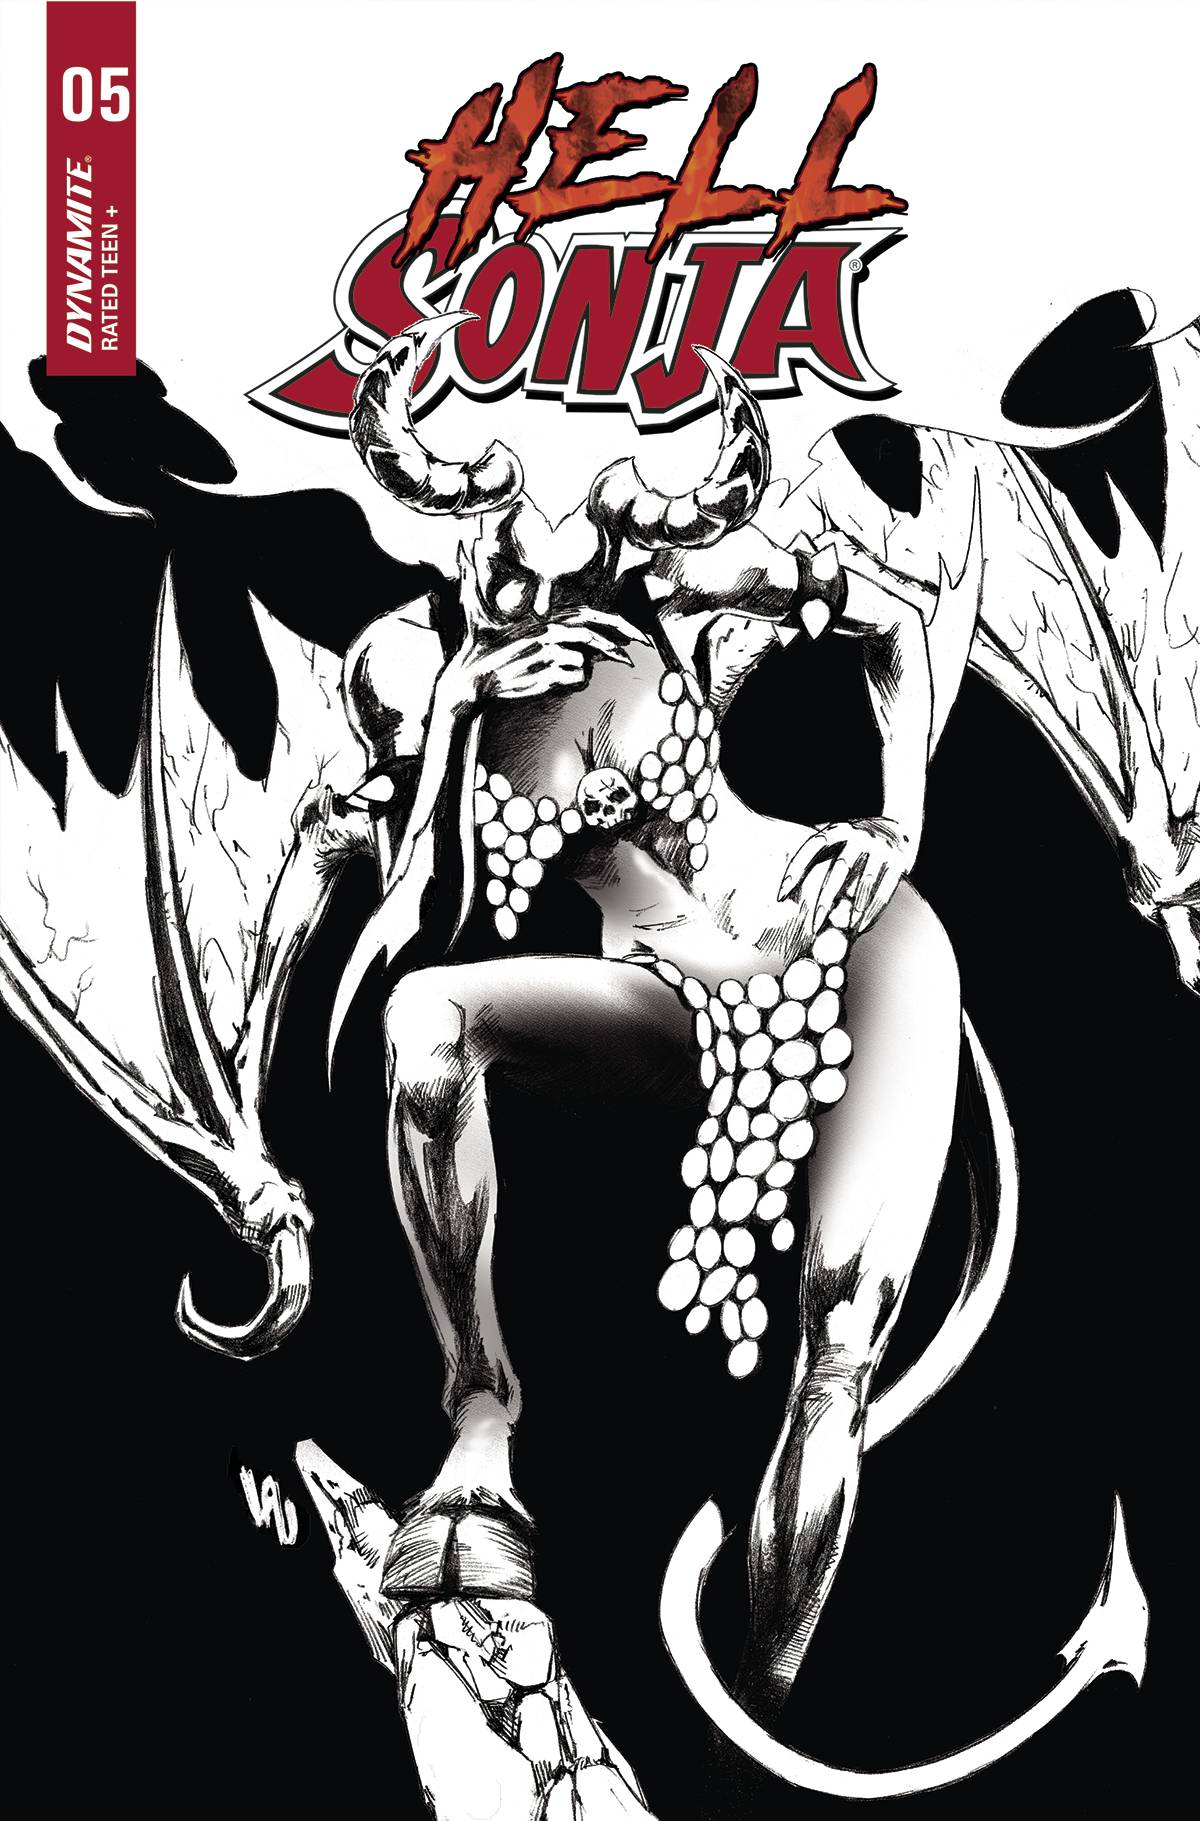 Hell Sonja #5 Cover N 7 Copy Last Call Incentive Lau Black & White